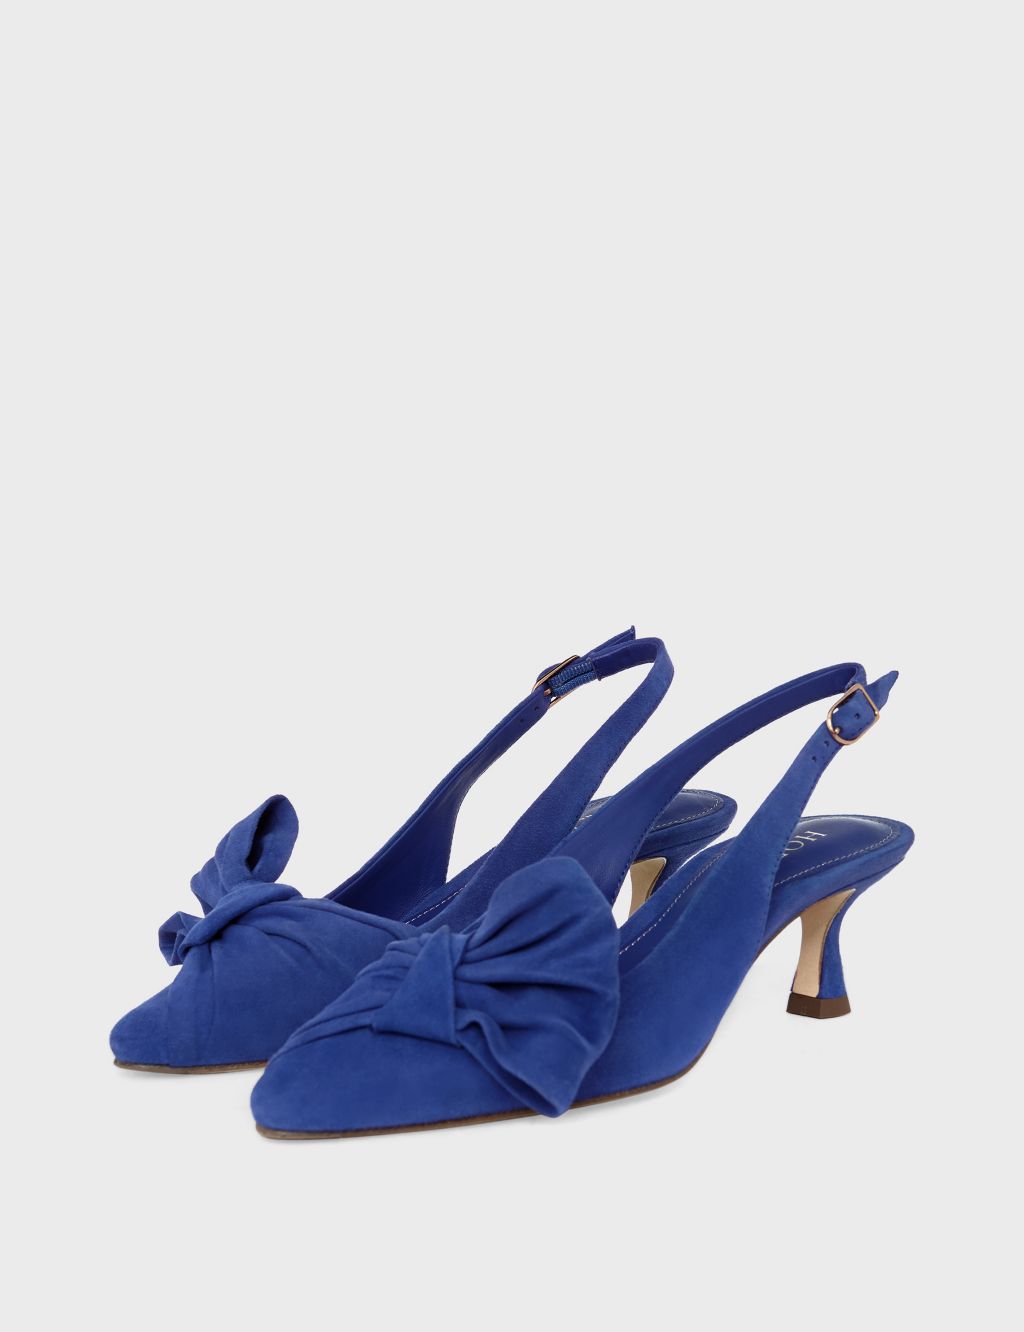 Suede Bow Kitten Heel Slingback Shoes image 3